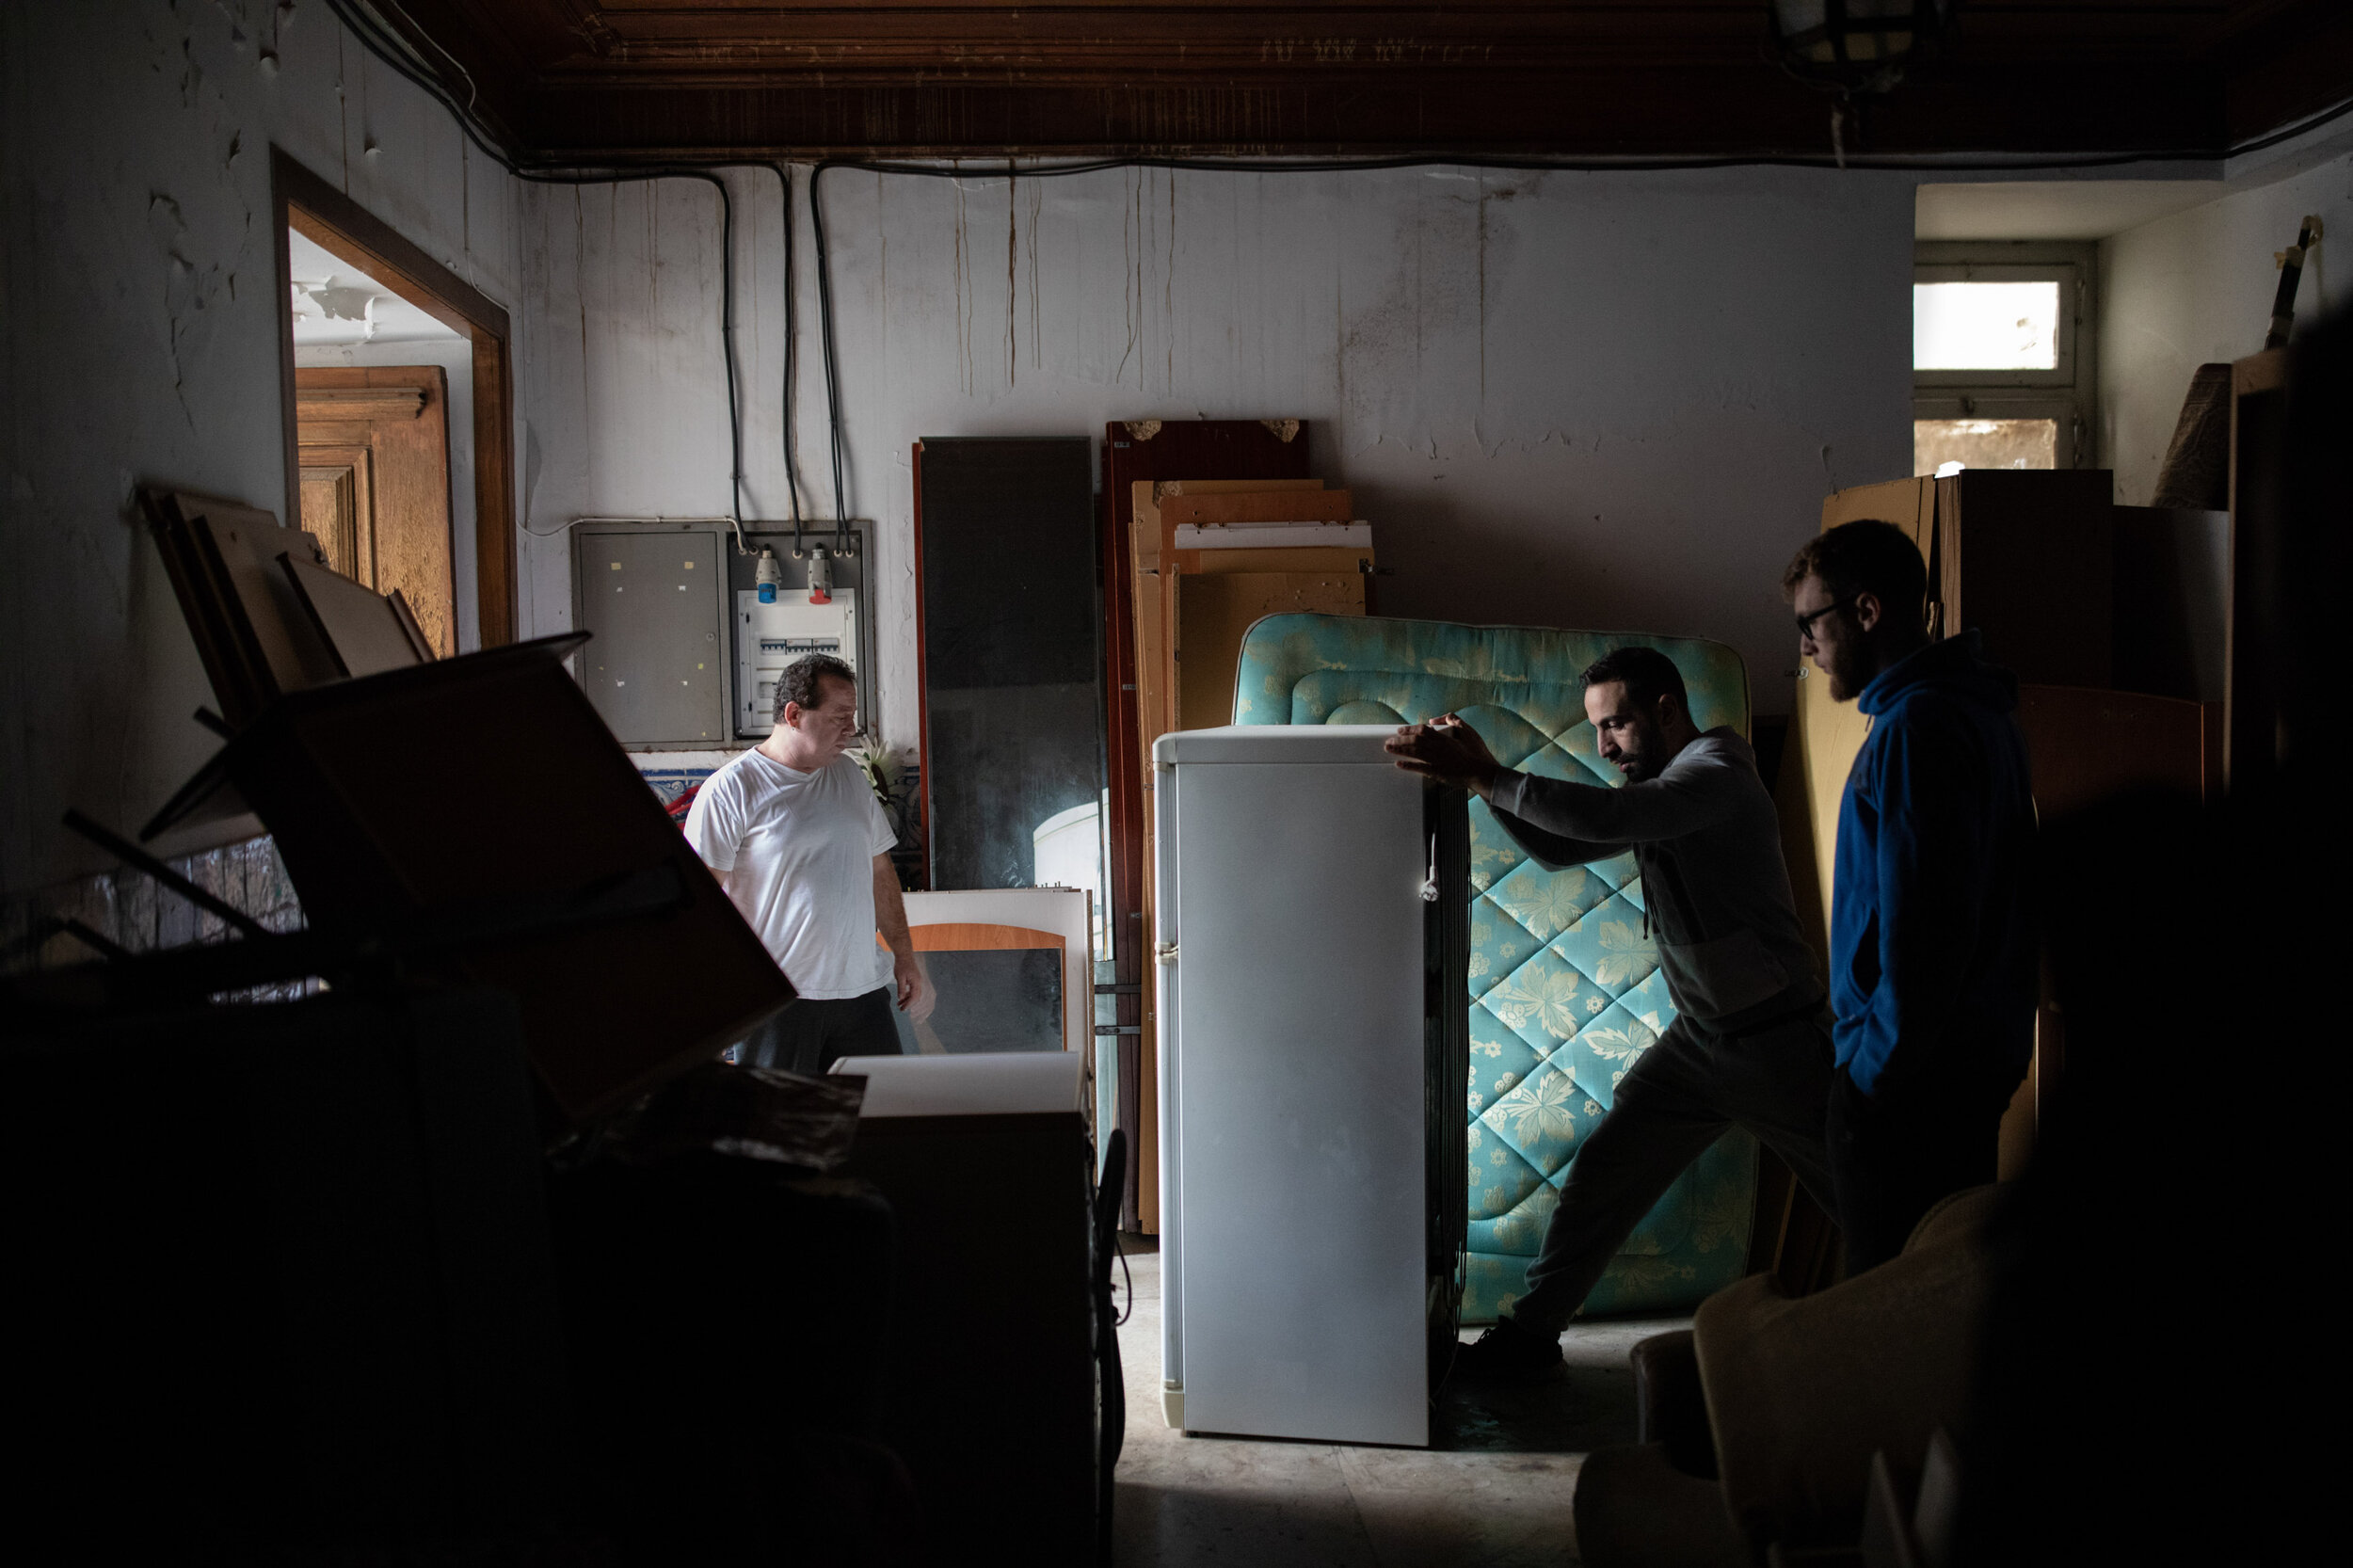  25th of November 2019   Maria Pereira’s eldest son (left) looks on as a moving crew takes her things from the wharehouse where the landlord dumped her things. After visiting her son in Luxemburg, the 78 year old Maria Pereira found the lock on the d